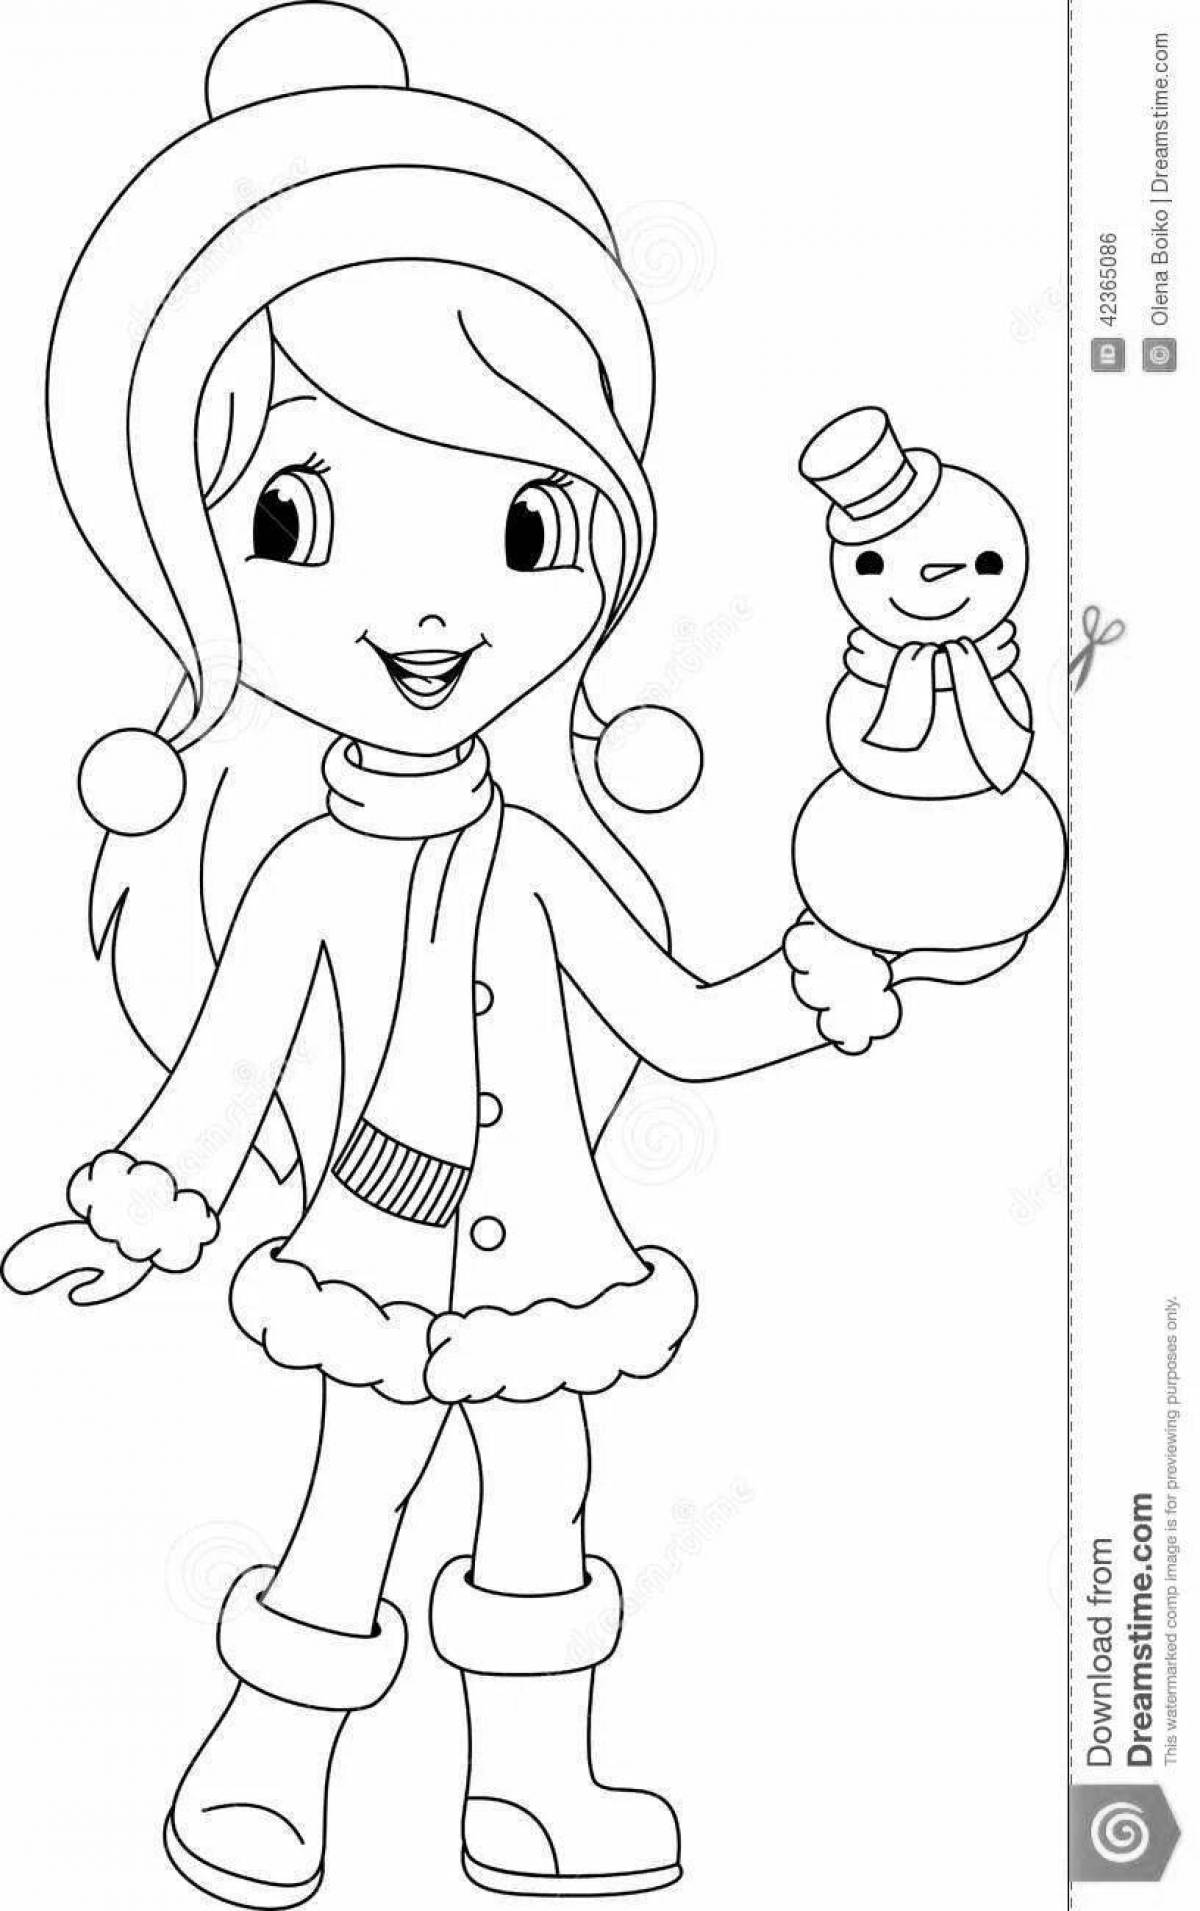 Charming coloring book girl in winter clothes